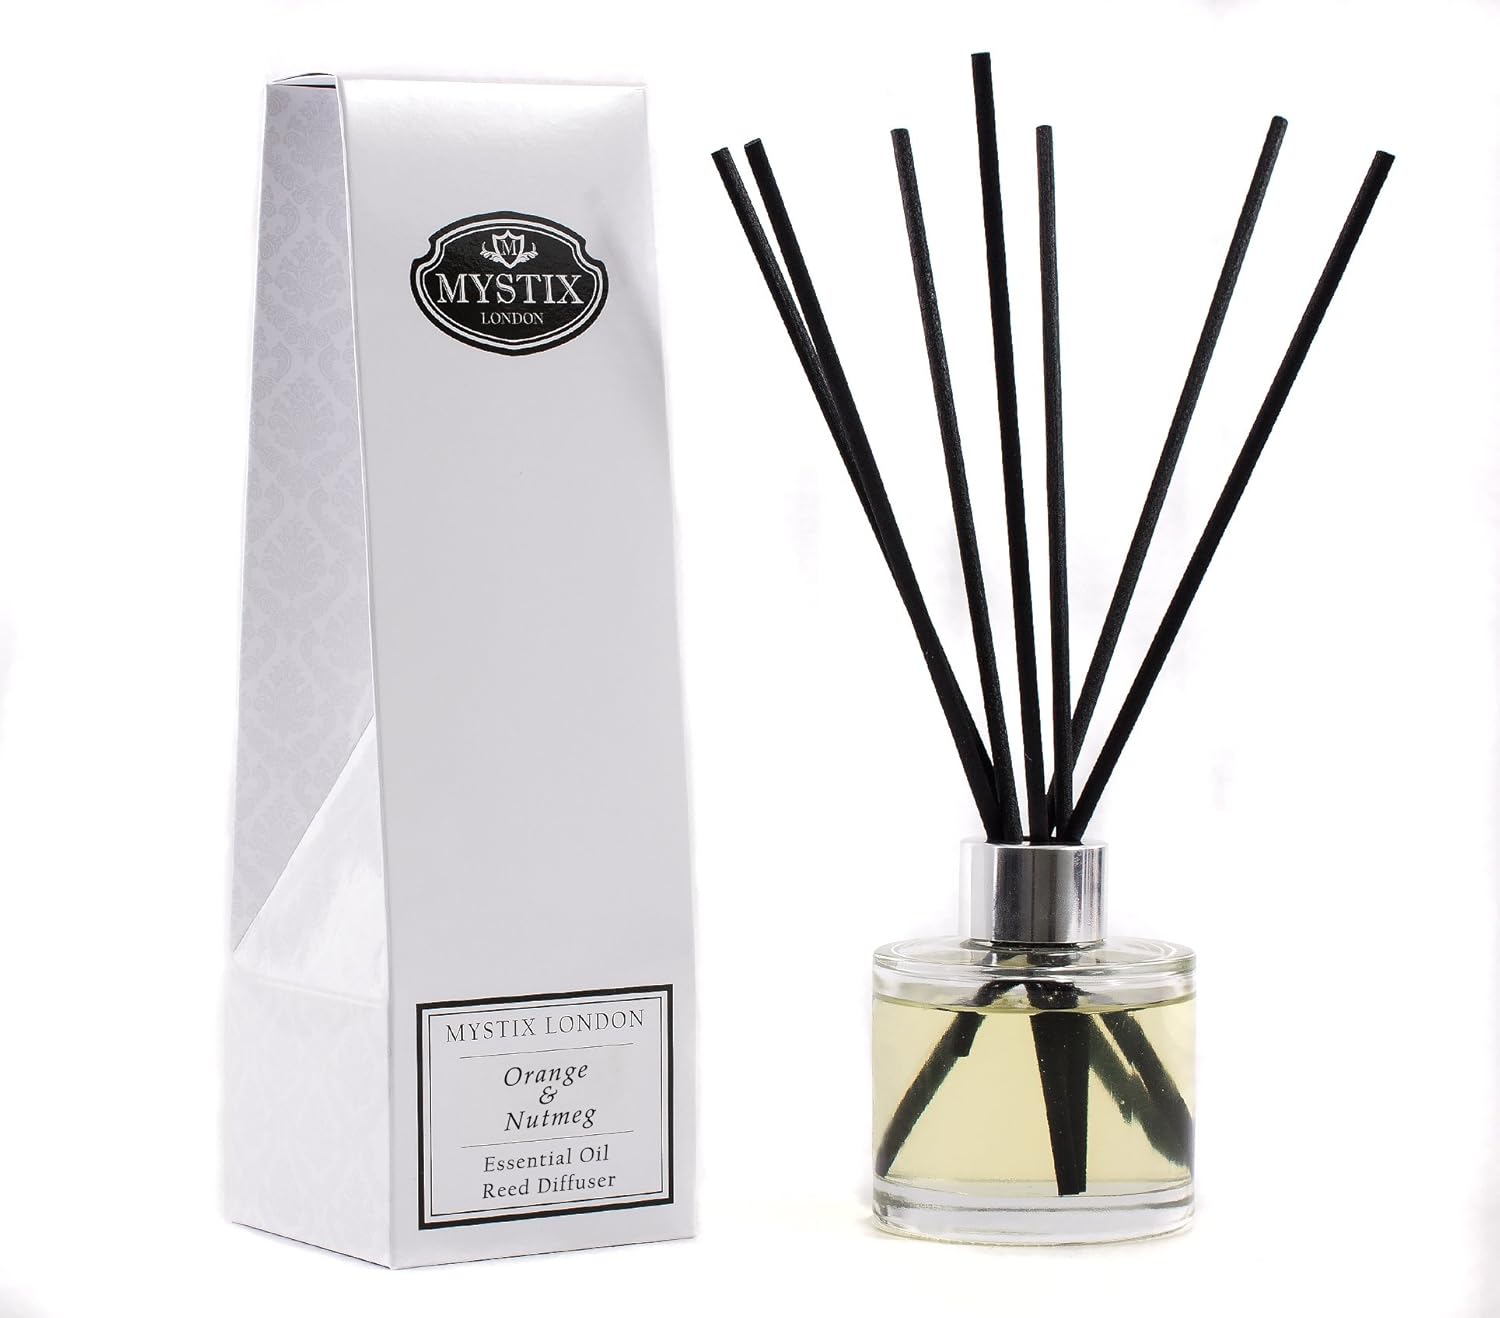 Mystix London | Orange & Nutmeg Essential Oil Reed Diffuser | 100ml | Best Aroma for Home, Kitchen, Living Room and Bathroom | Perfect as a Gift | Refillable